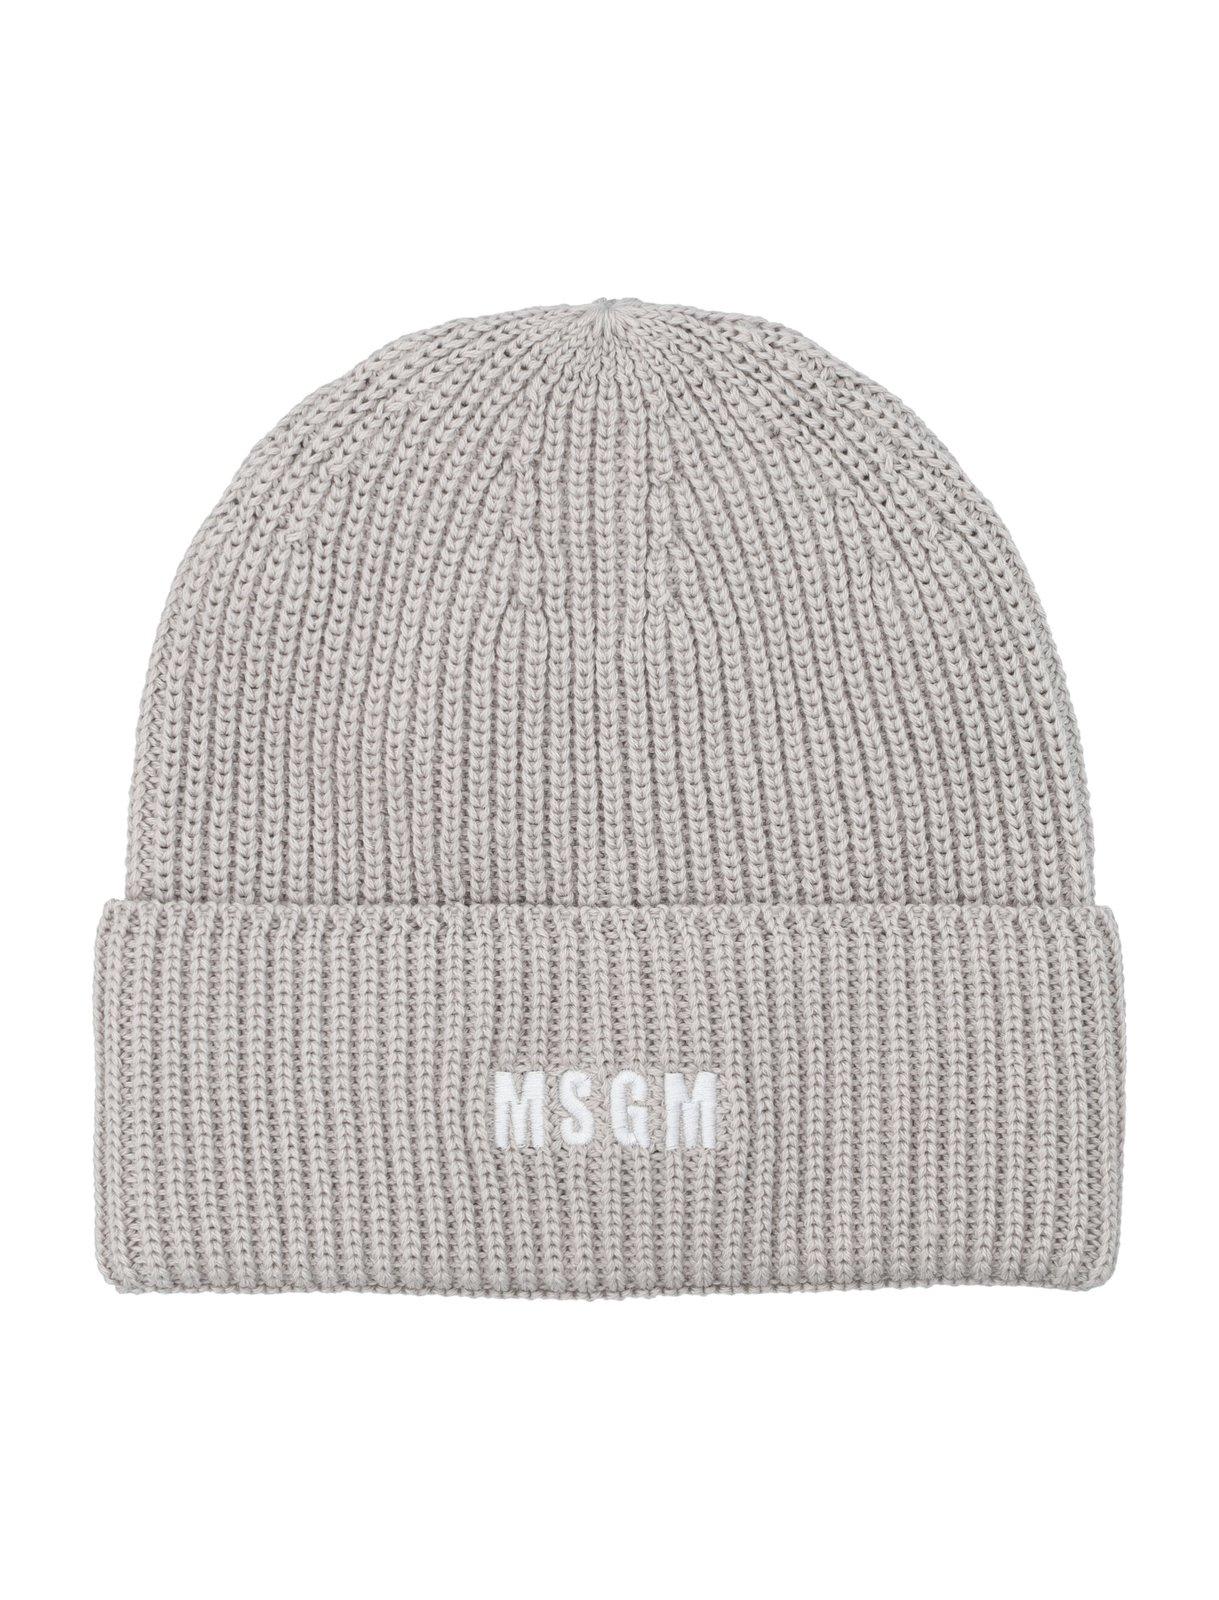 Logo Embroidered Knitted Beanie MSGM